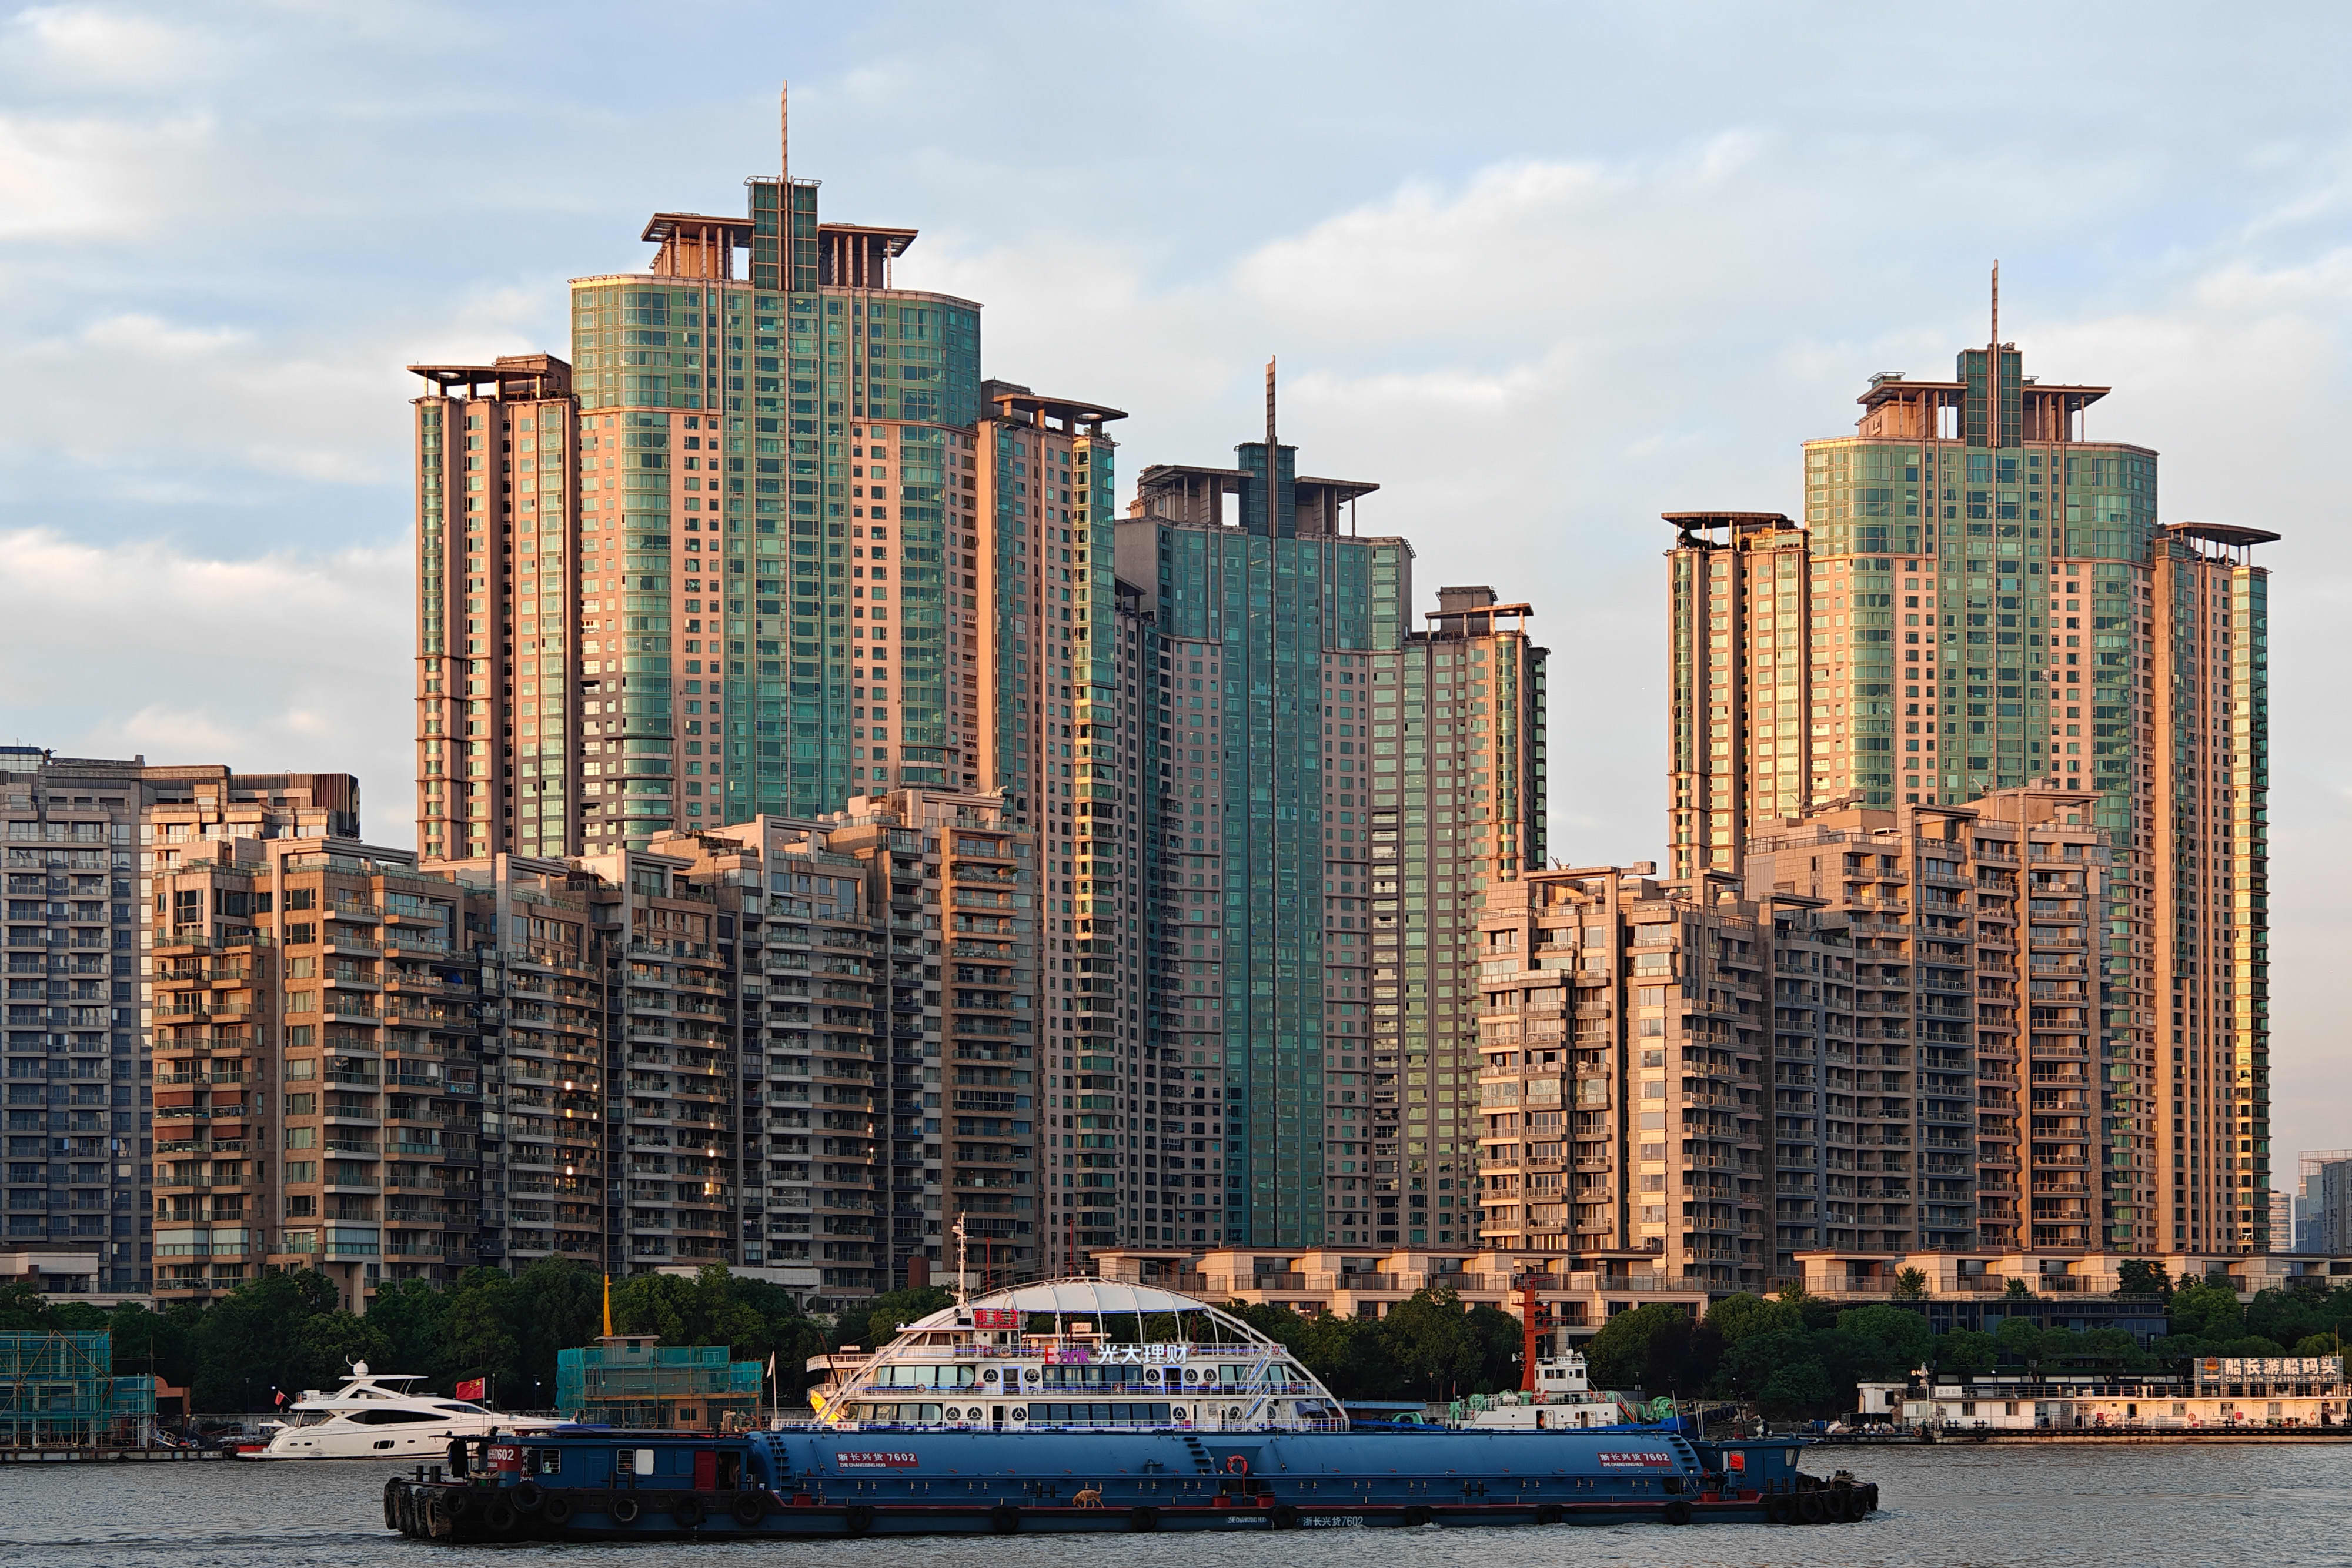 China Property Investment Sees Decline of Nearly 8% as Zhongzhi Group Faces Liquidity Crisis